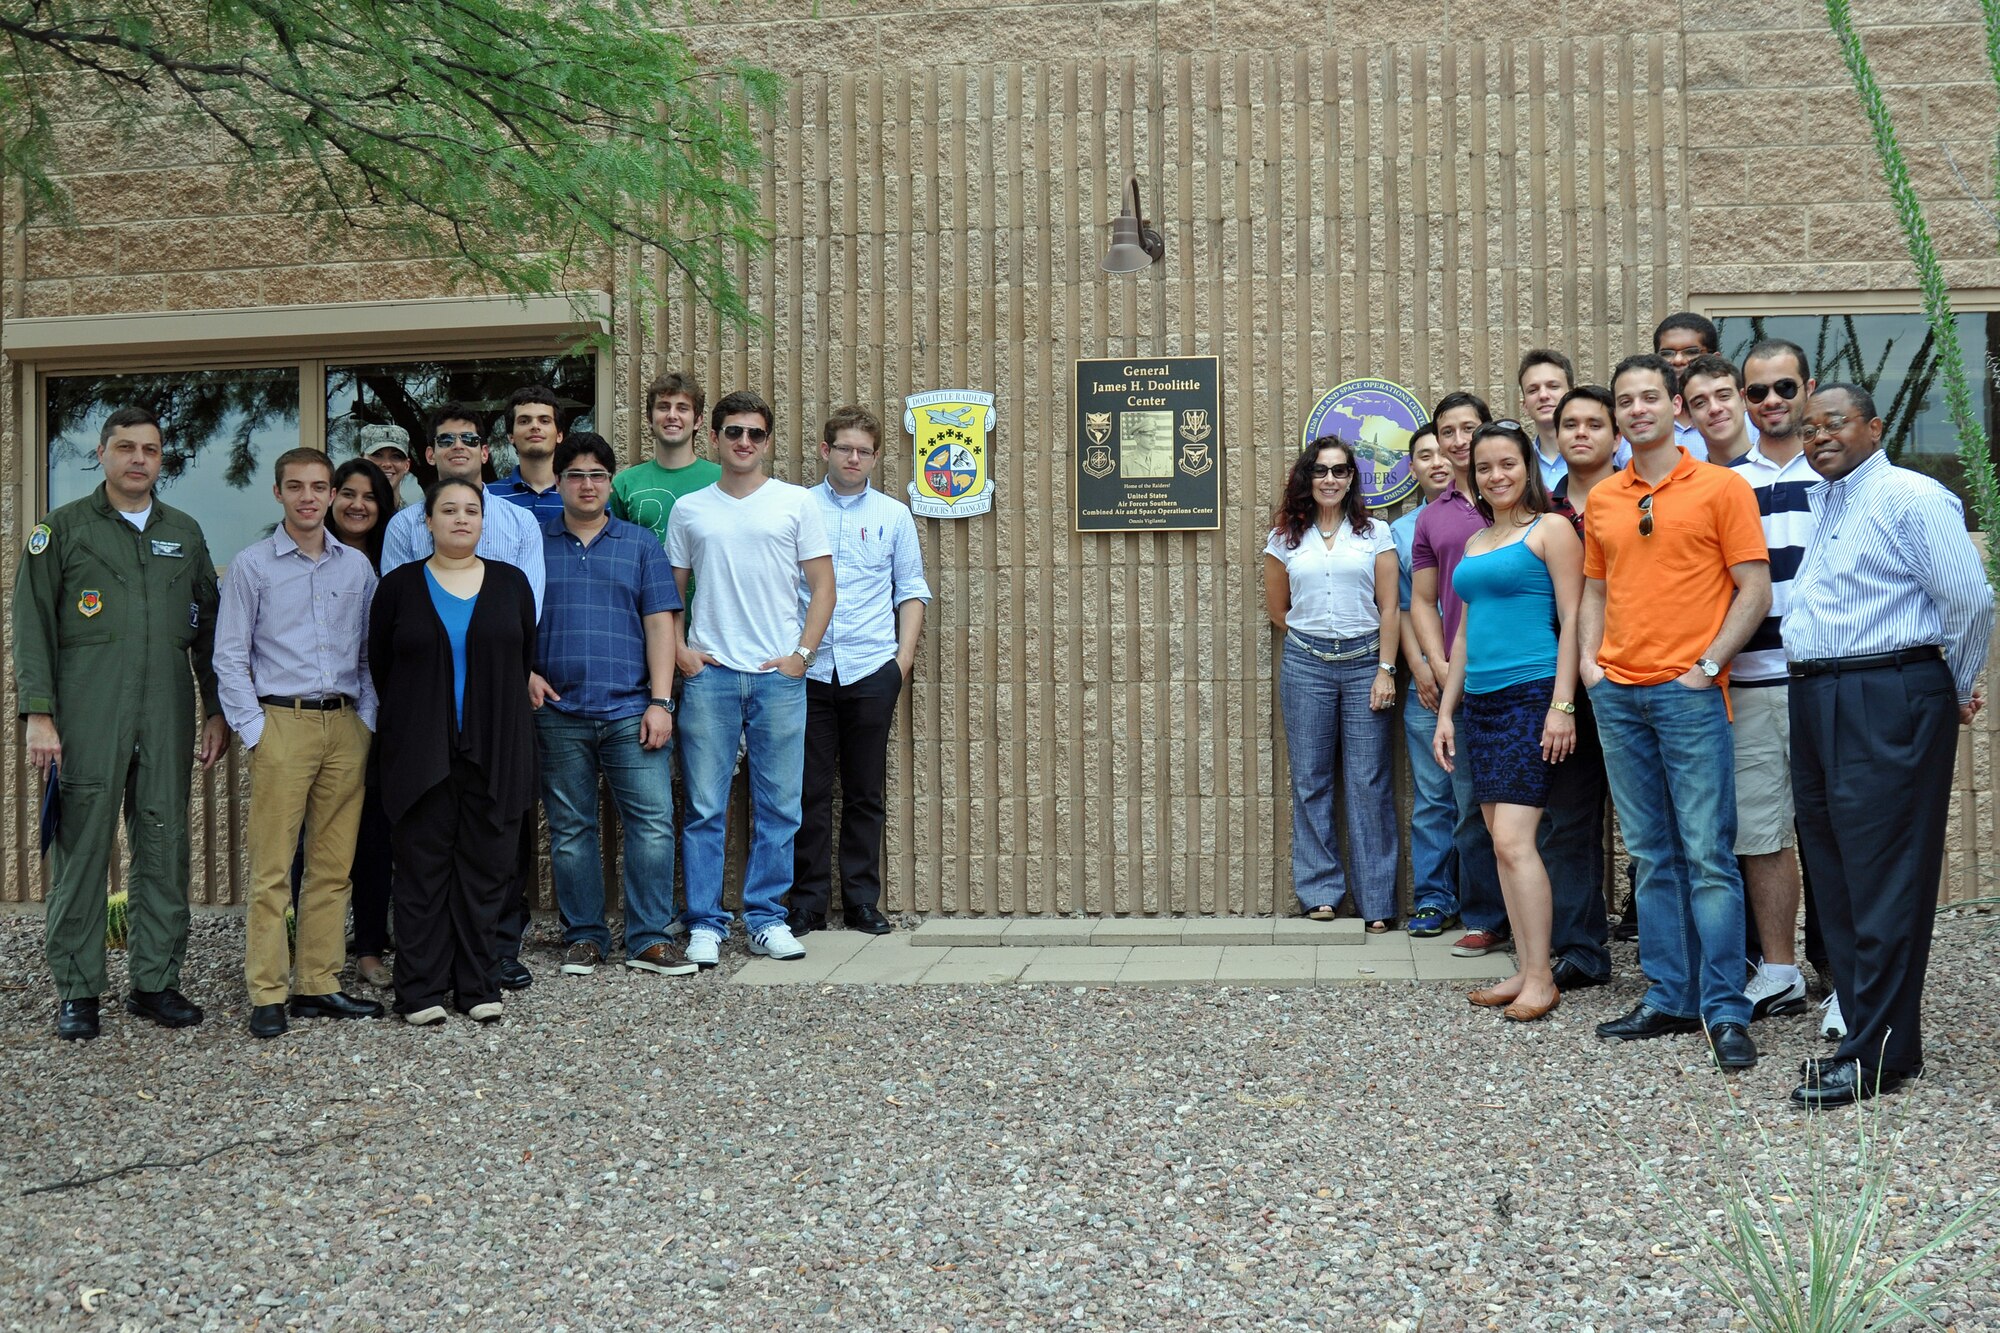 Graduate and doctoral engineering students from Brazil pose for a picture at the 612th Air and Space Operations Center with Col. Paulo Vasconcellos, Brazilian Air Force liaison officer to Headquarters Twelfth Air Force (Air Forces Southern), during a tour of Davis-Monthan Air Force Base, July 24. The students were in Tucson, Ariz., visiting the nearby Raytheon Company as part of Brazil’s Science Without Borders program and requested the opportunity to visit D-M. The 612th AOC provides command and control of U.S. air and space assets 24-hours-a-day to support joint and coalition efforts in the Caribbean, Central America and South America.  (U.S. Air Force photo/Capt. Jonathan Simmons)